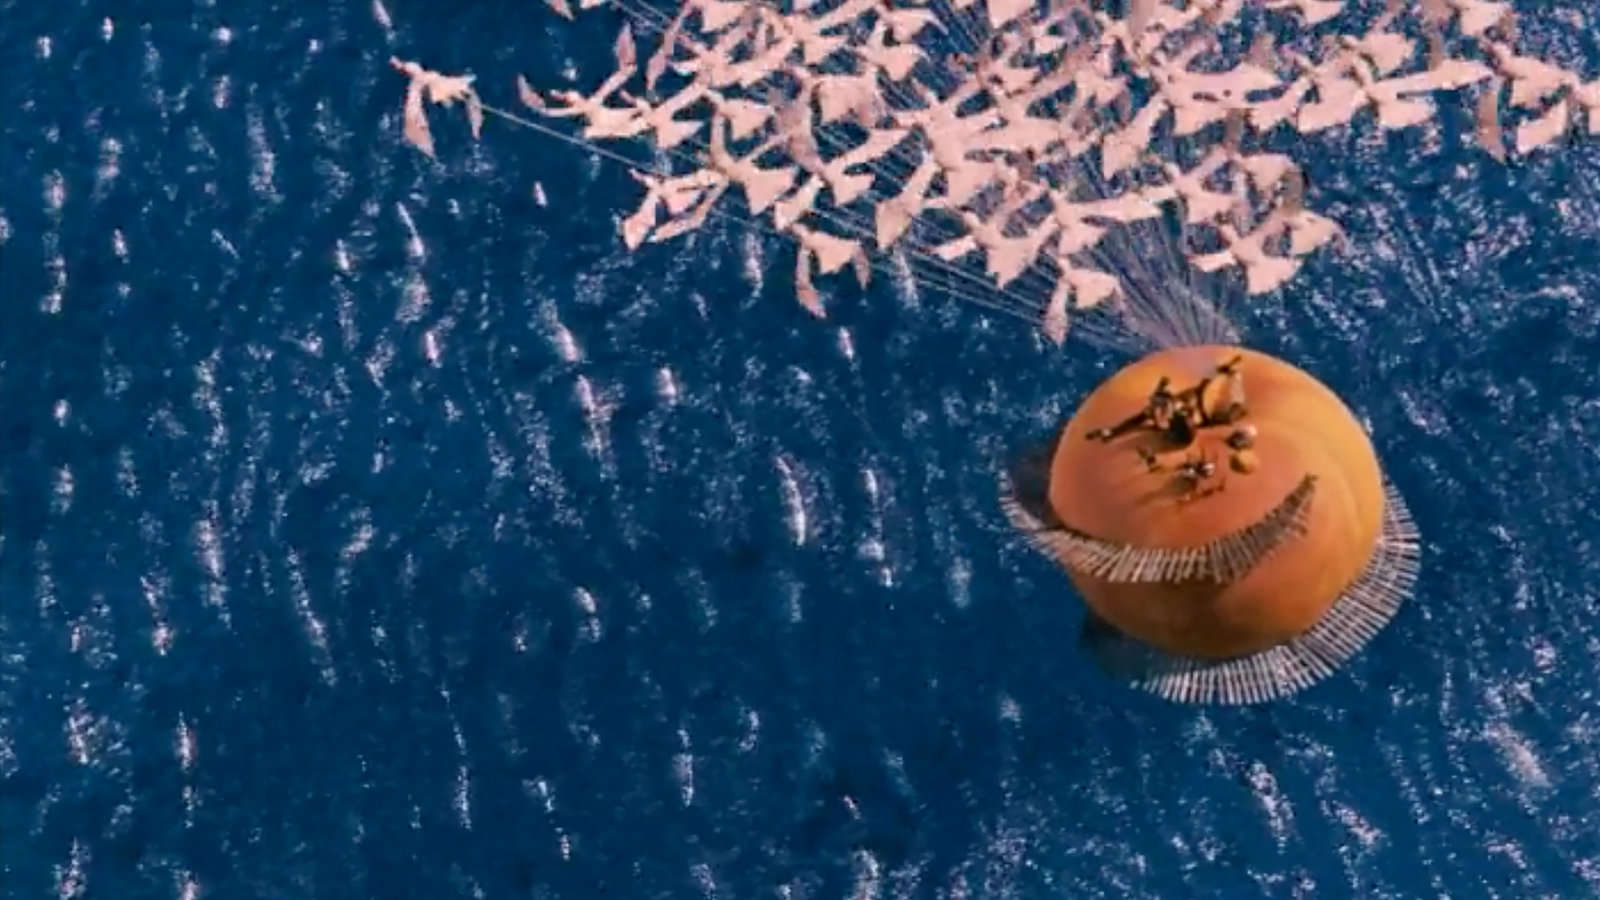 how-many-seagulls-would-you-need-to-lift-james-giant-peach-the